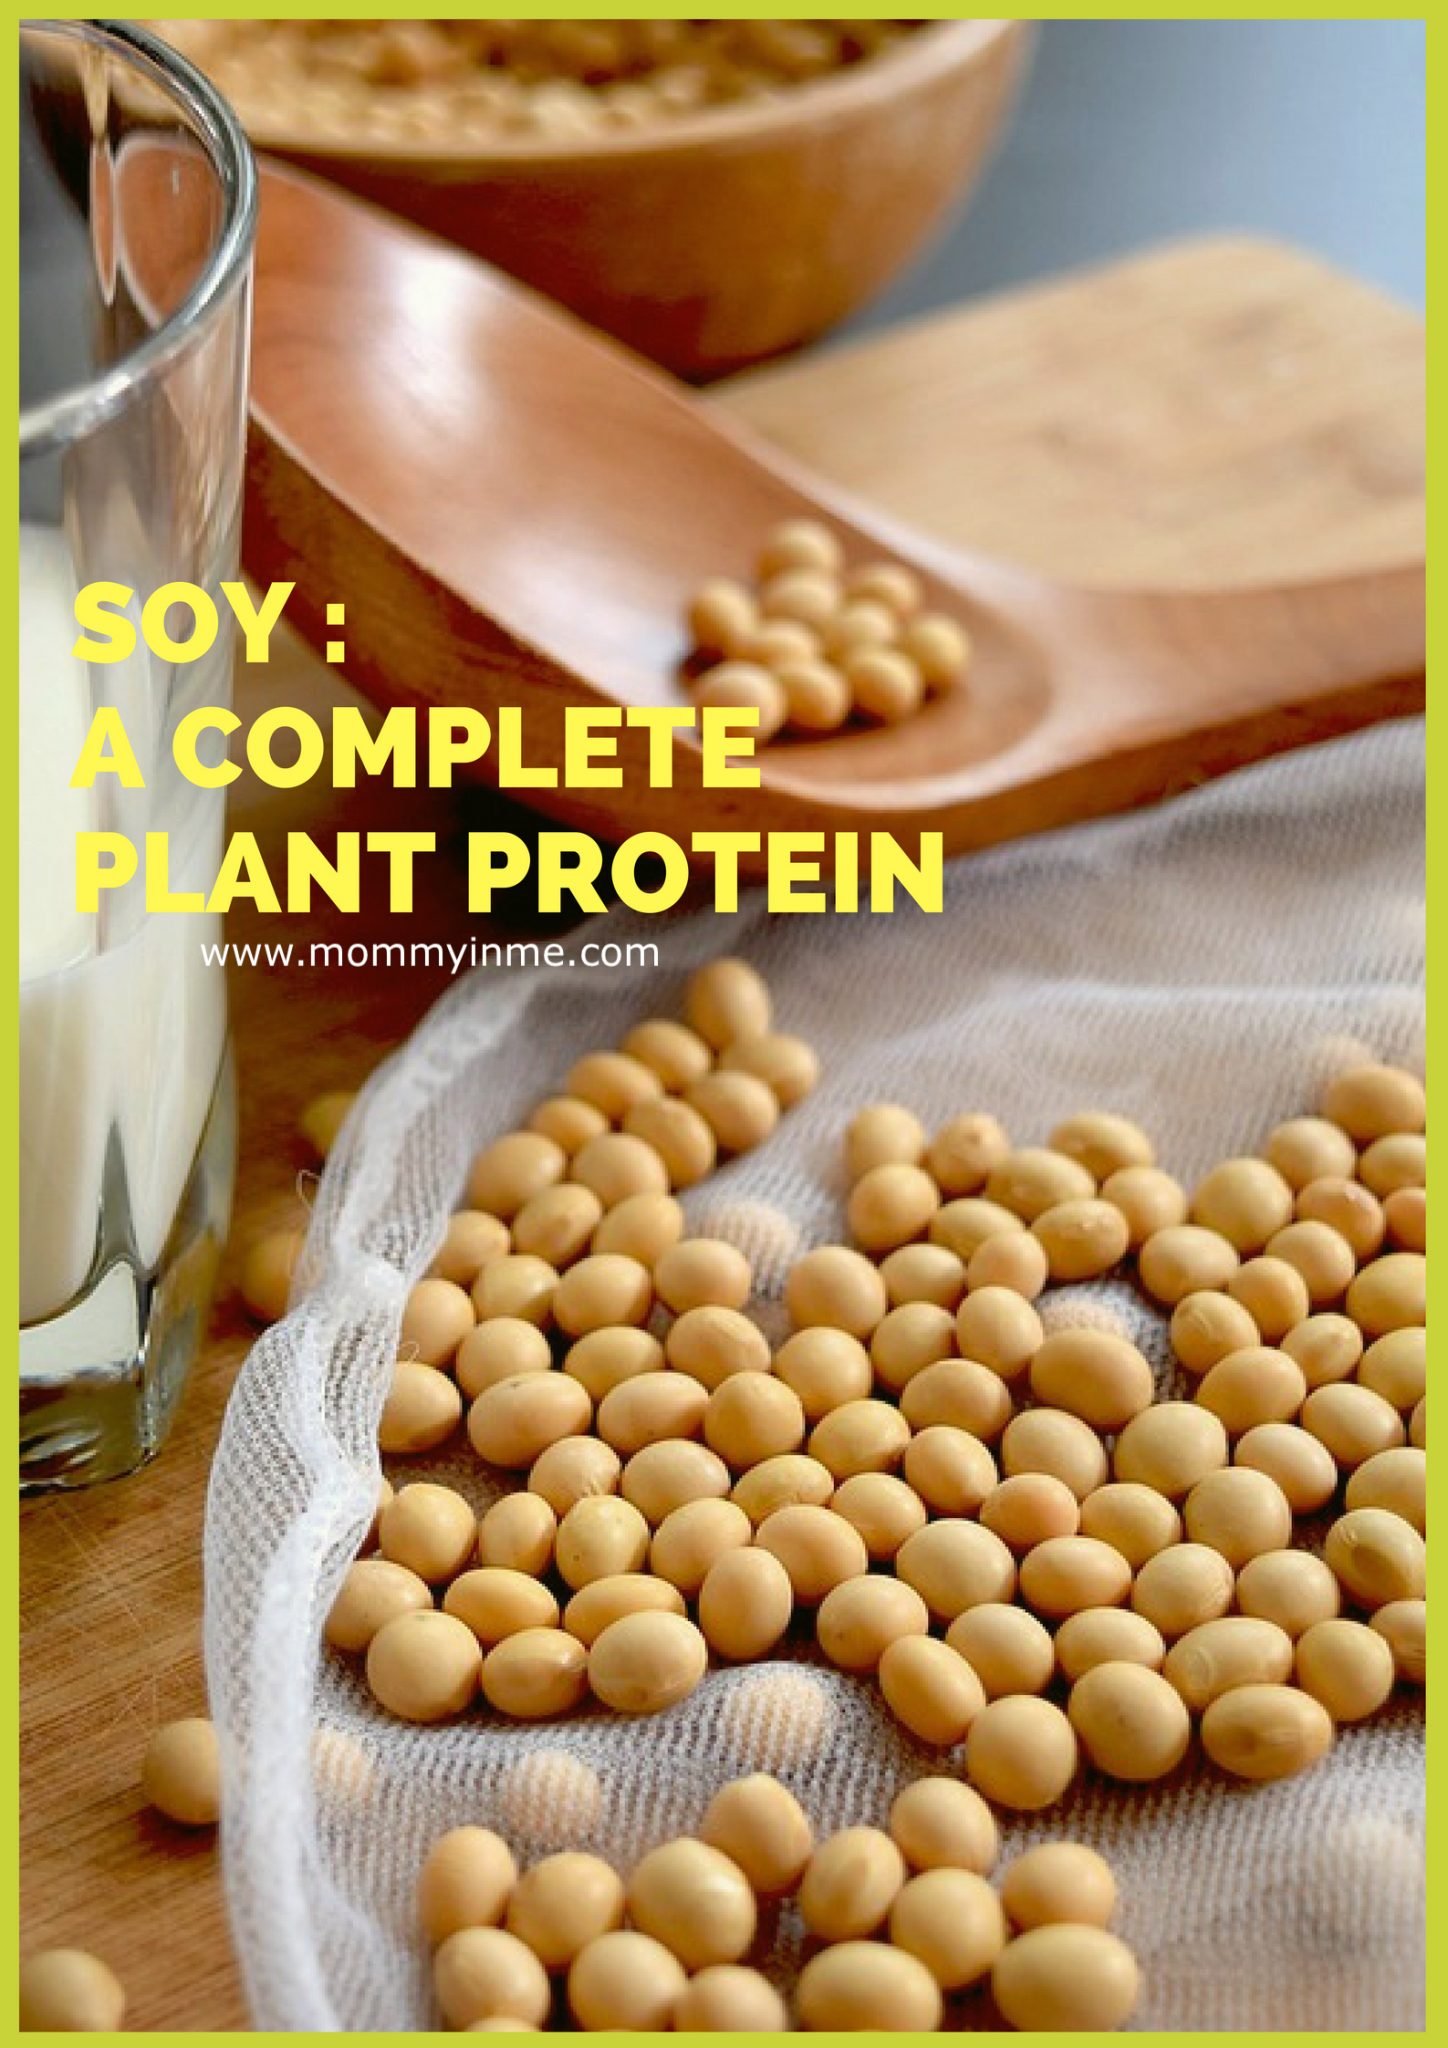 Soybean is a great plant based source of proteins. It is a complete protein as it provides all 9 eseential amino acids required for tissue synthesis. Soy protein is important for Weight loss, better heart health, lowering high Blood pressure, lowering cholesterol levels and more. Read to know more of SOy awareness by DuPont . #soybean #soyprotein #proteinawareness #DuPont #protein #weightloss #healthyfood